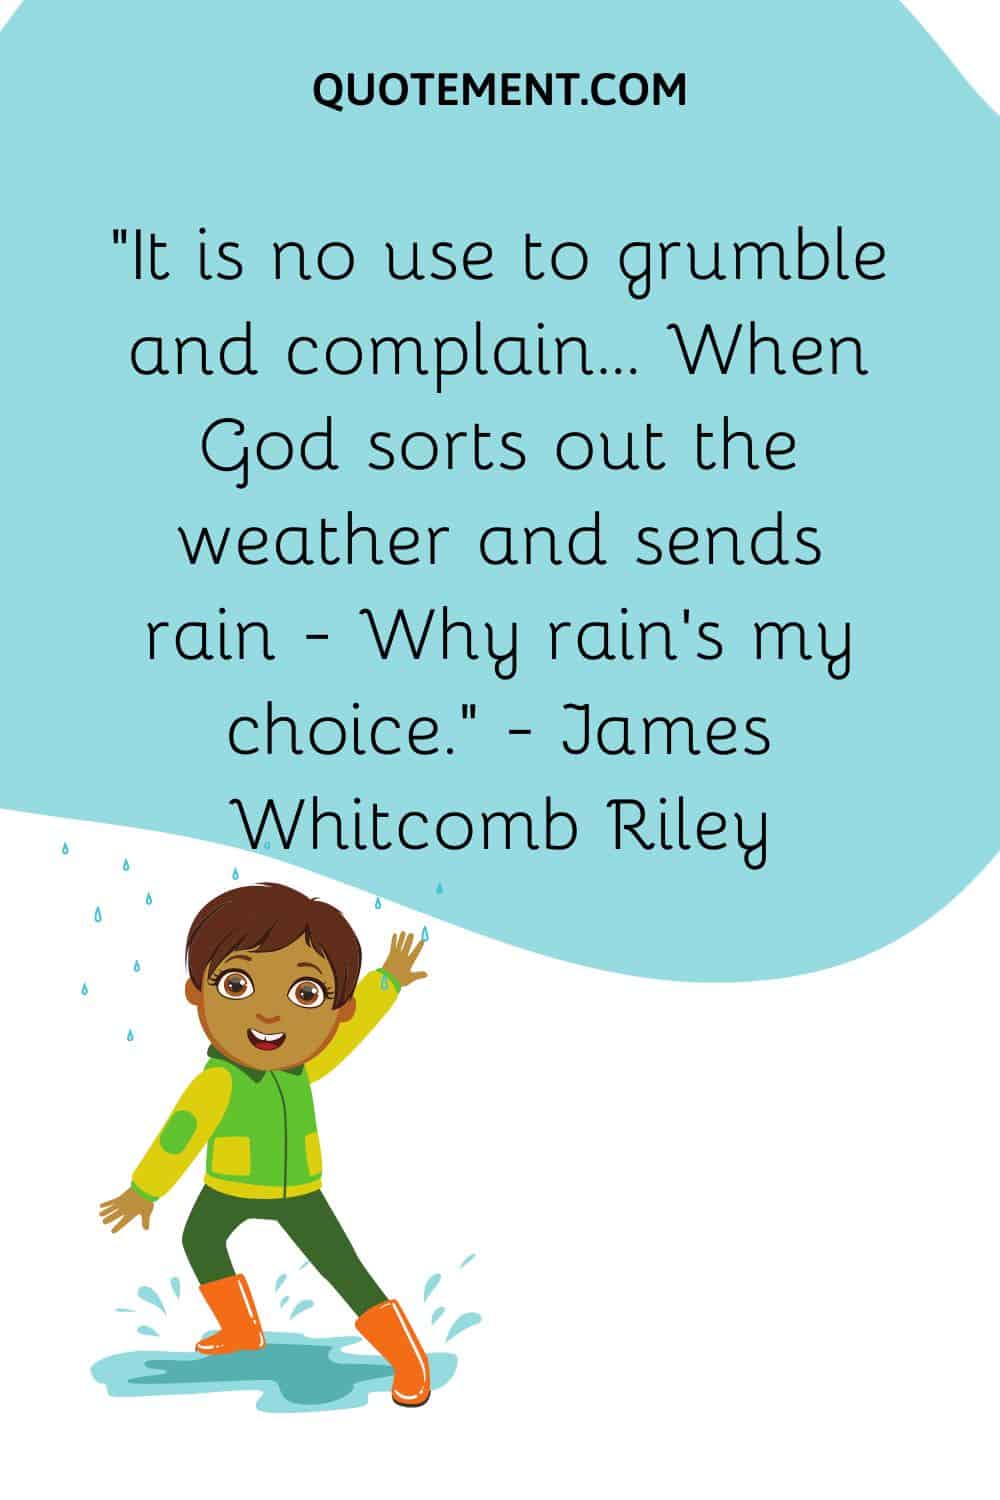 It is no use to grumble and complain... When God sorts out the weather and sends rain — Why rain's my choice